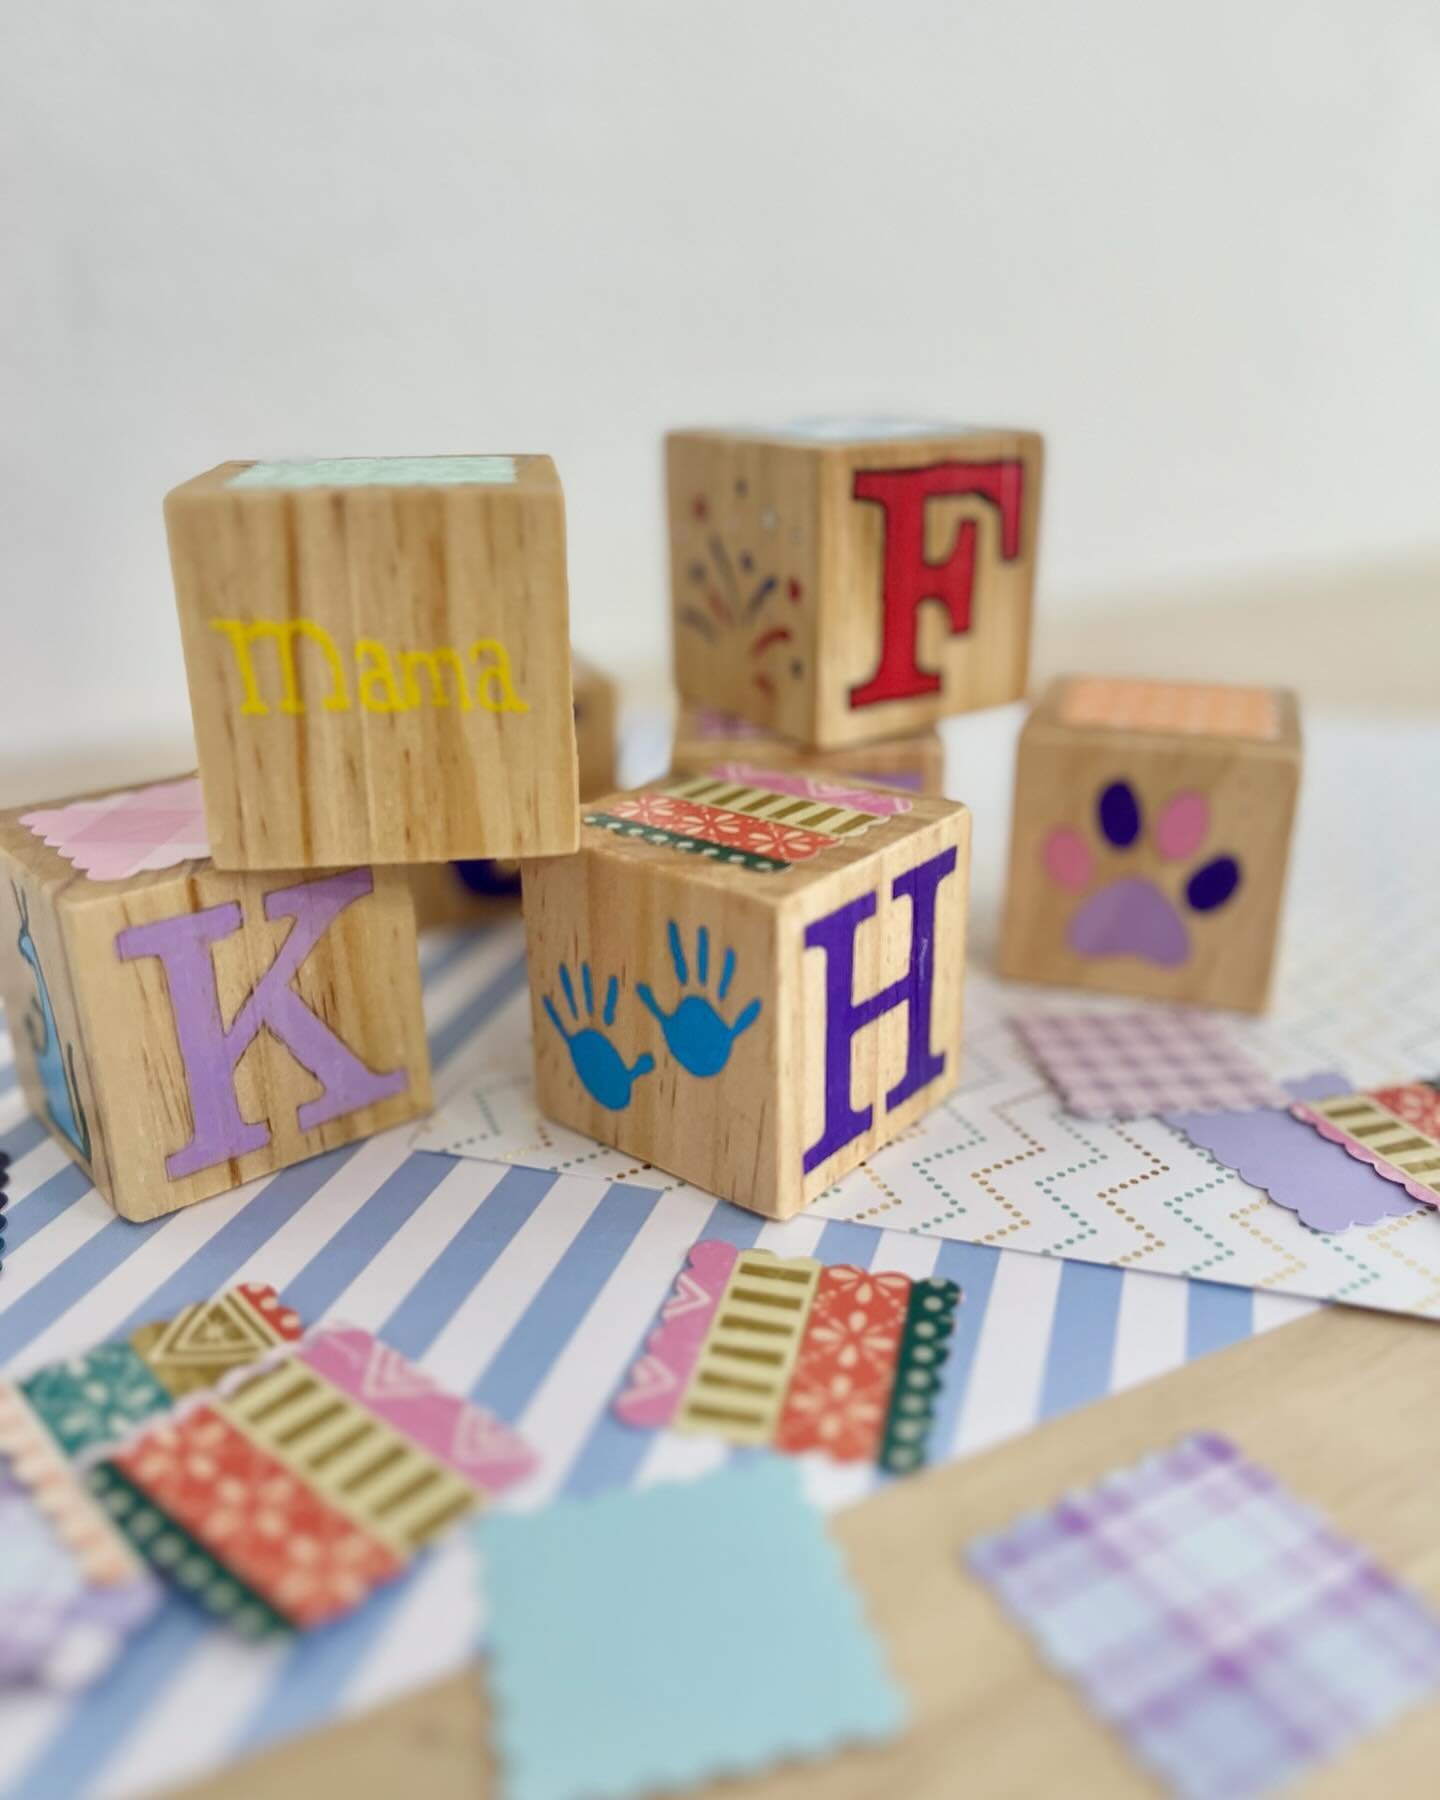 Creating custom experiences to celebrate special occasions brings us so much joy. This &lsquo;build a block&rsquo; baby shower activity is one of our all time favorites. 
We provide the materials and instruction while guests gather and customize a se